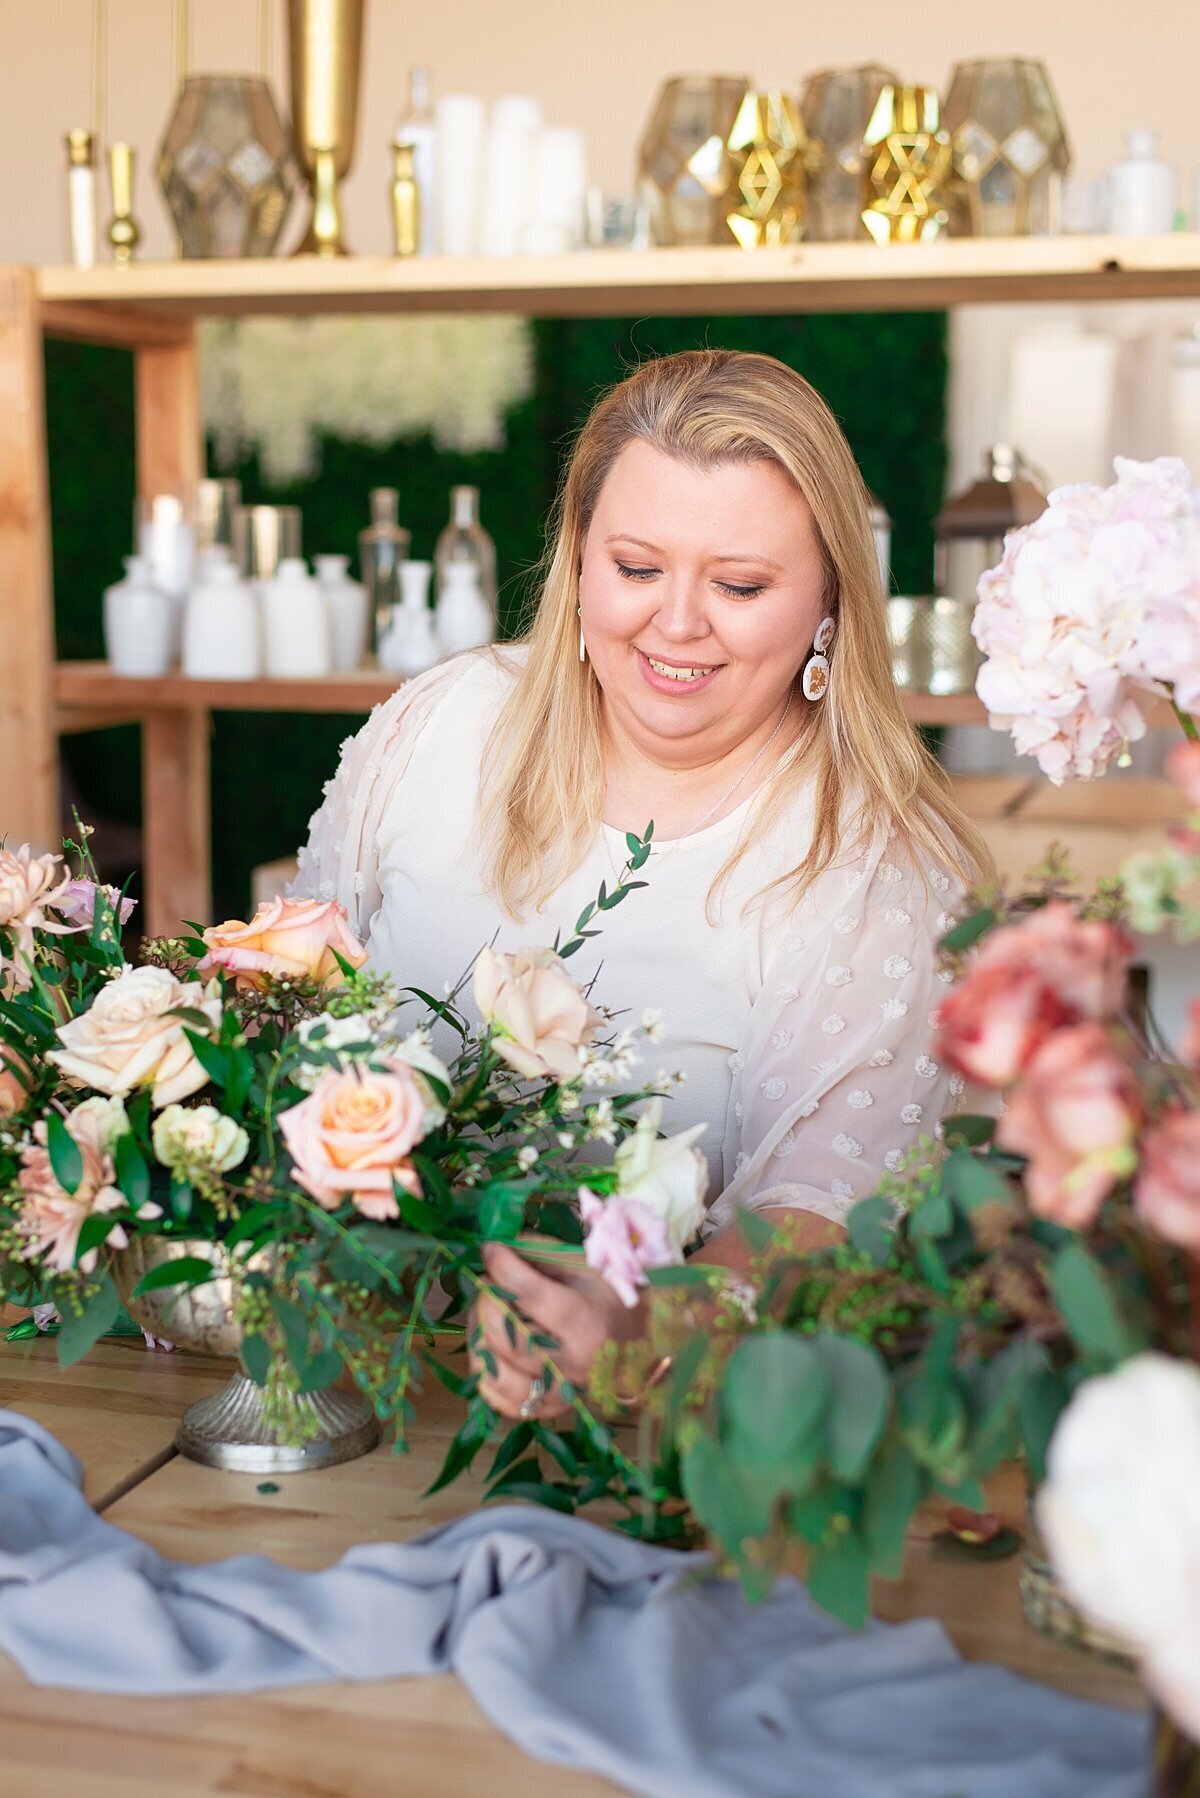 Natasha Larson arranging a greenery and dusty rose compote